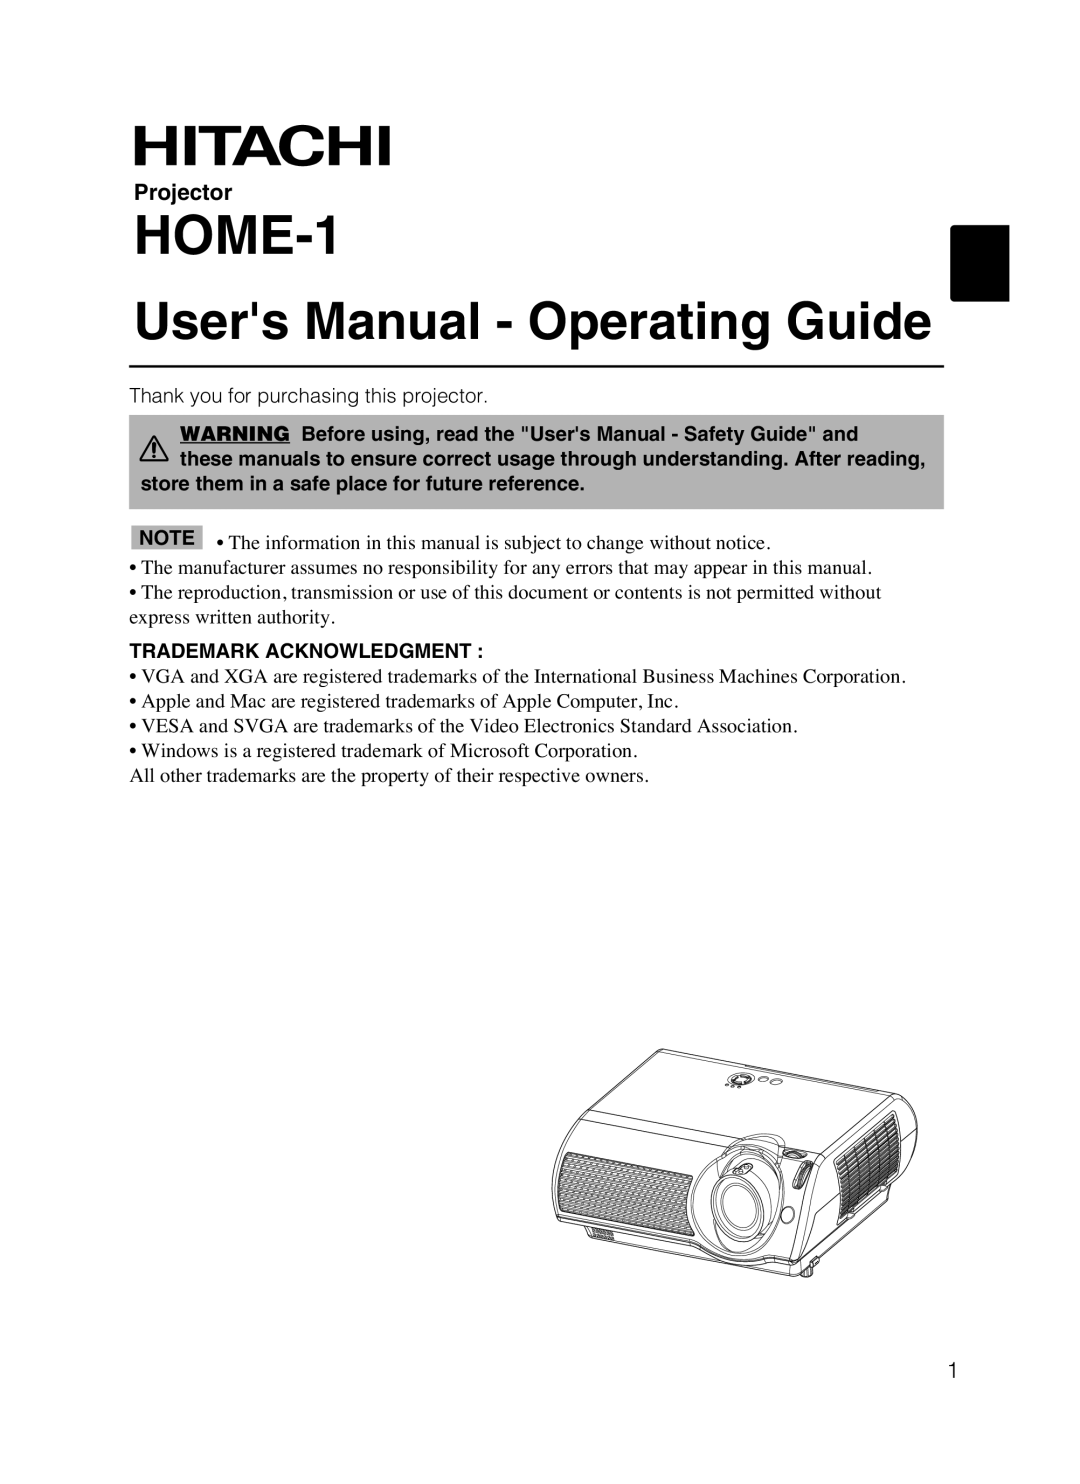 Hitachi HOME-1 user manual Projector, Users Manual - Operating Guide, Trademark Acknowledgment 